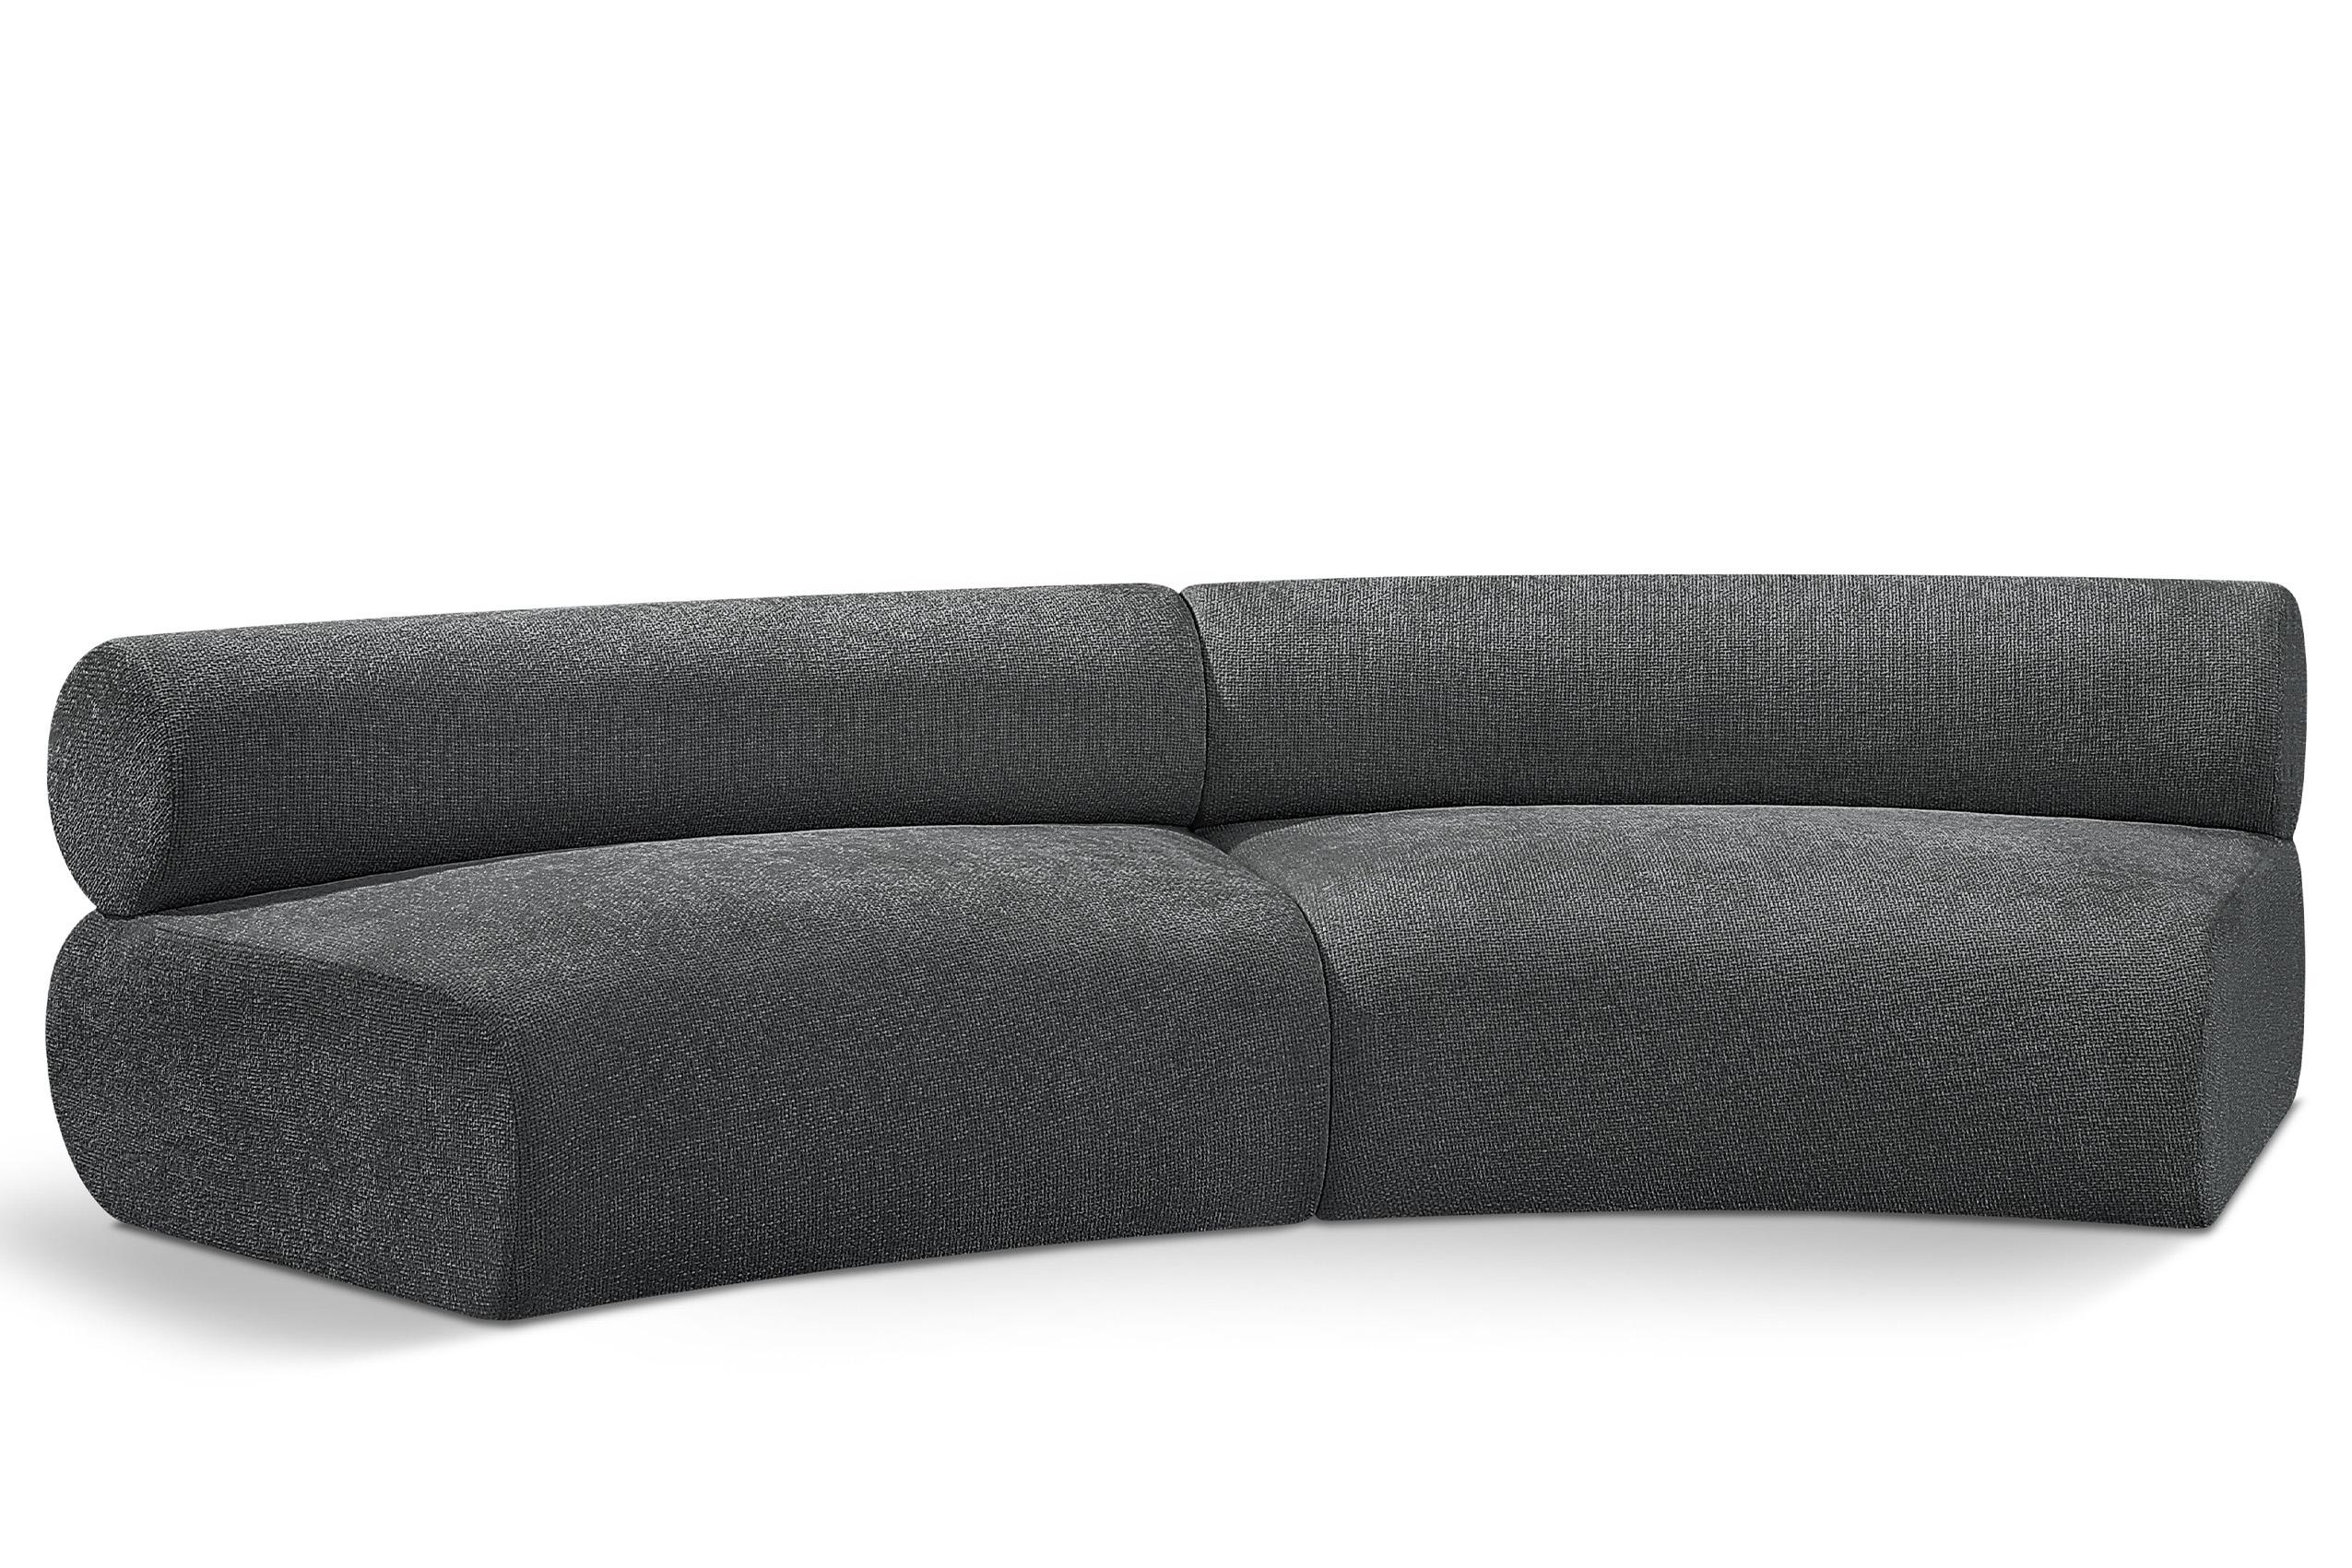 Contemporary, Modern Modular Sectional Sofa Bale 114Grey-S2A 114Grey-S2A in Charcoal Grey Chenille